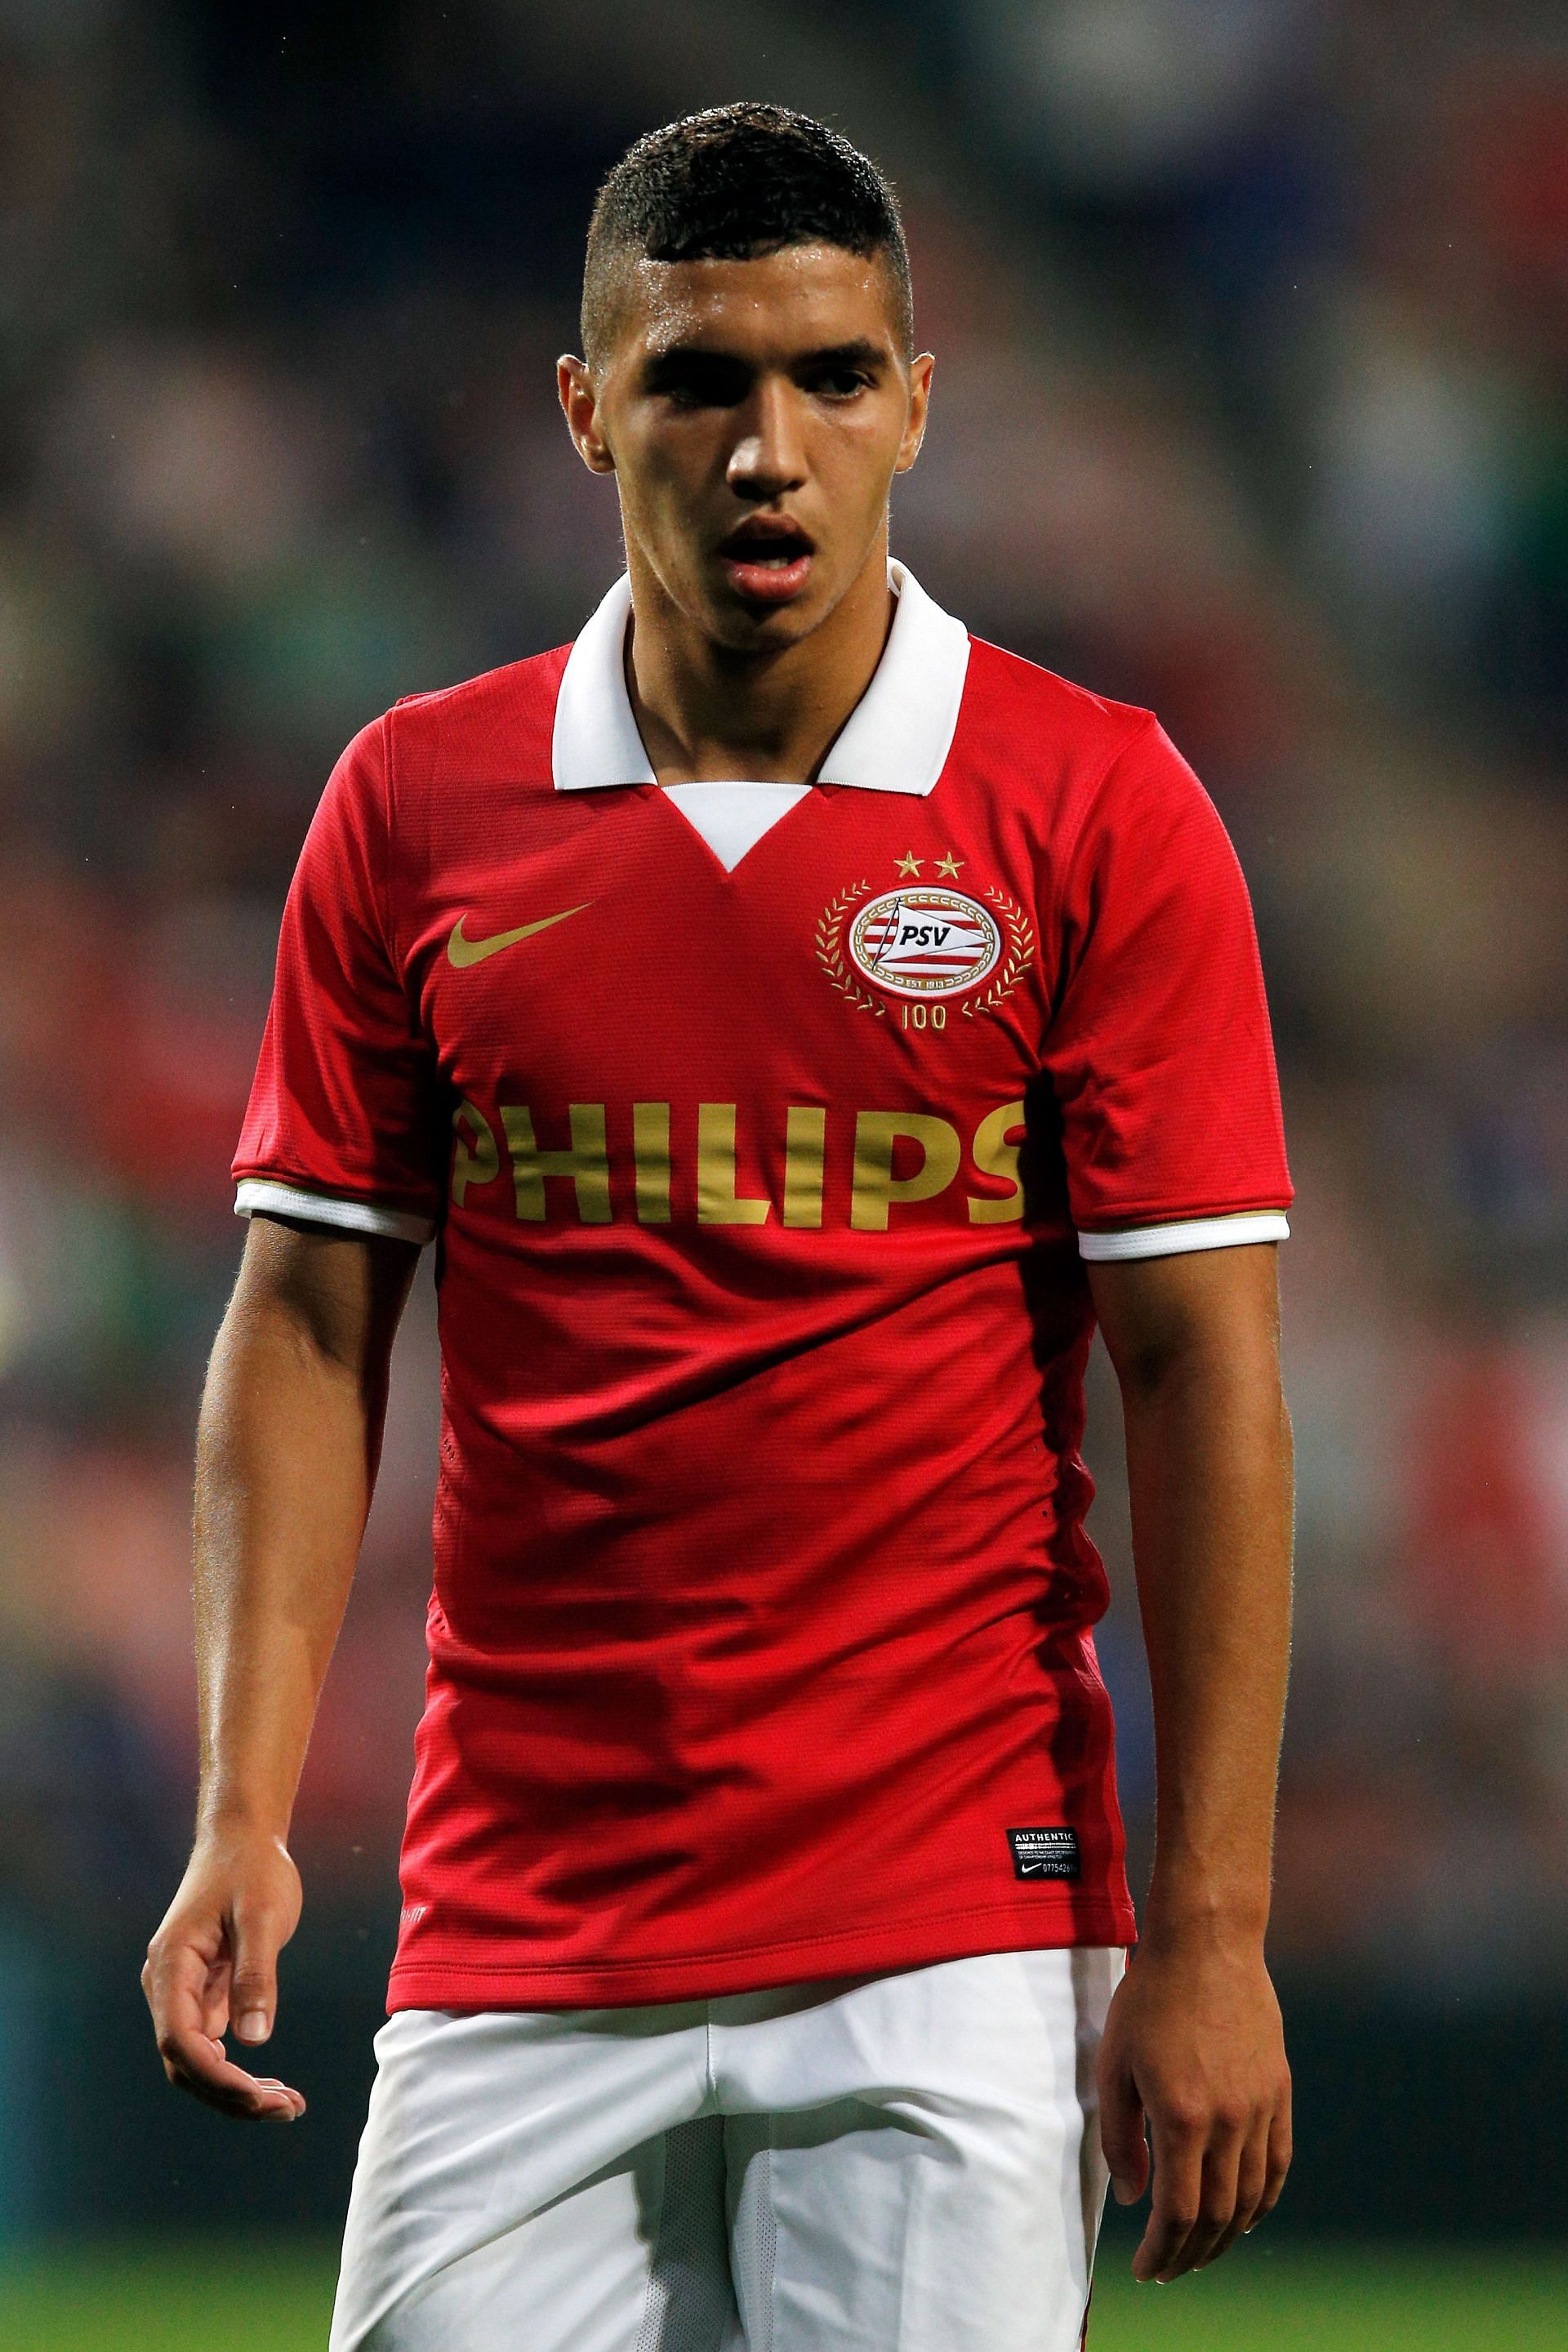 Zakaria Bakkali of PSV in action during the First Leg, 3rd Qualifying Round UEFA Champions League match between PSV Eindhoven and SV Zulte Waregem at Philips Stadion on July 30, 2013, in Eindhoven, Netherlands.